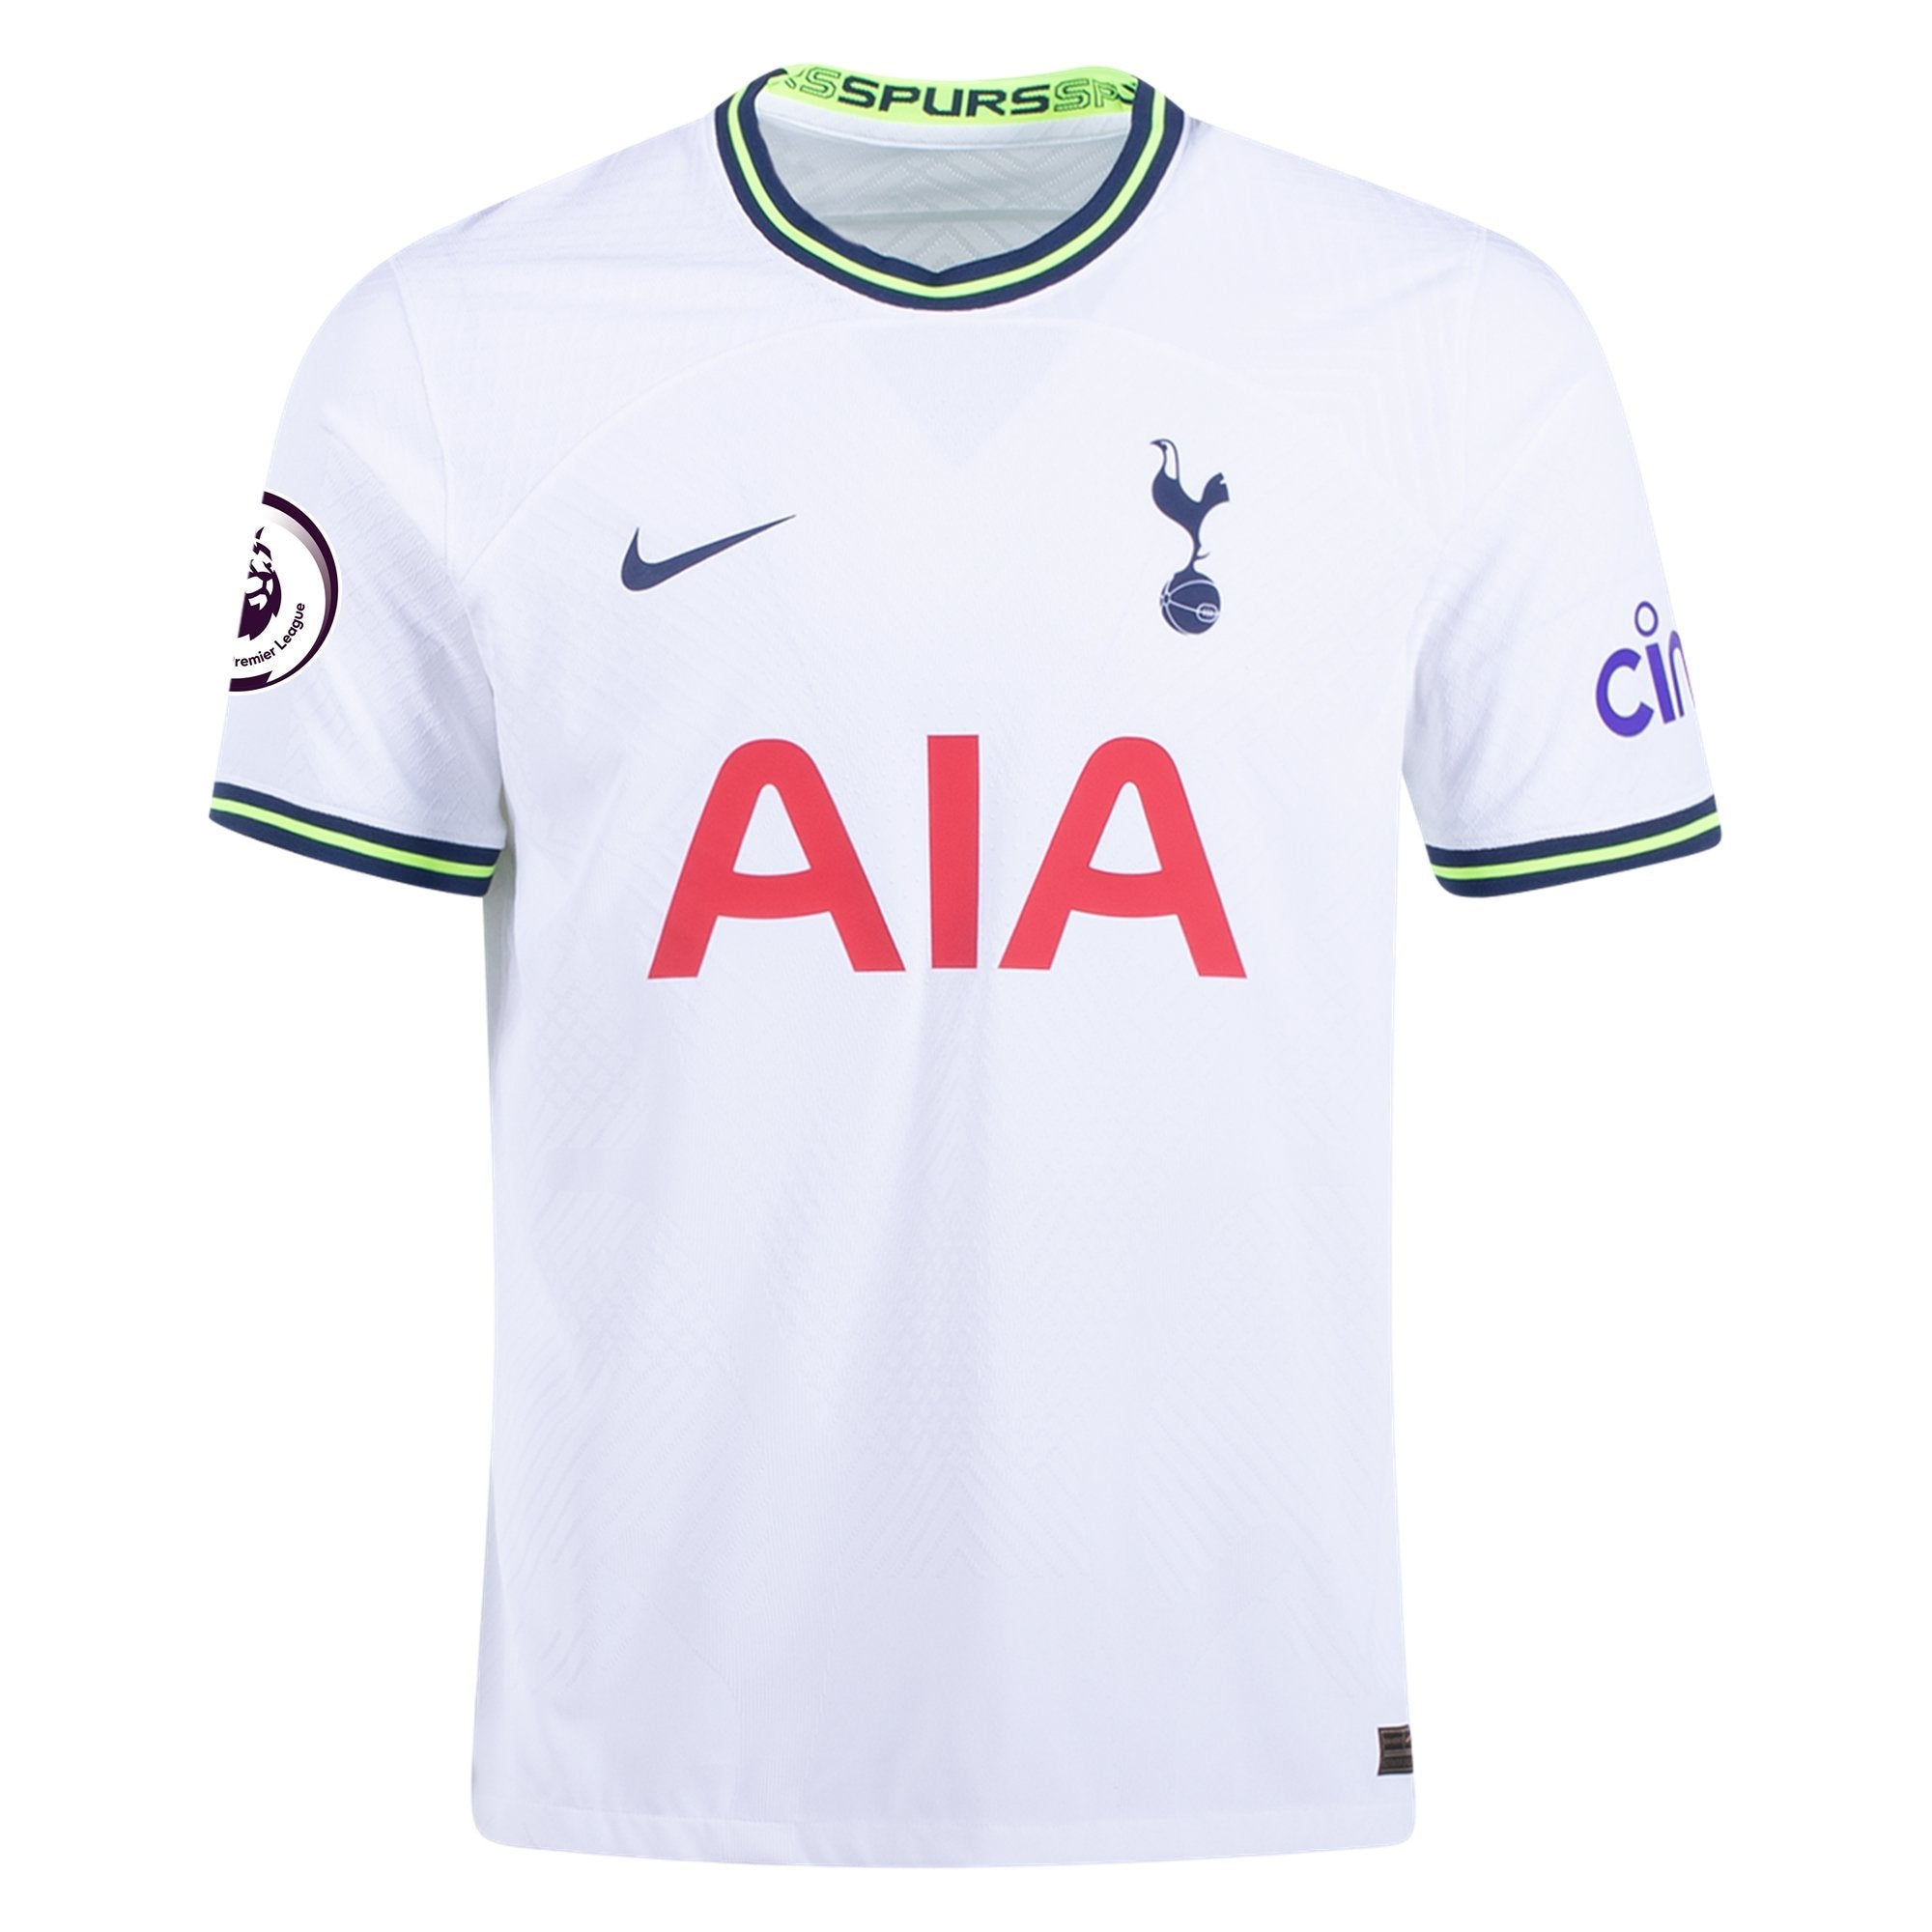 Check out Nike's new Harry Kane Tottenham NFL jersey, on sale now -  Cartilage Free Captain